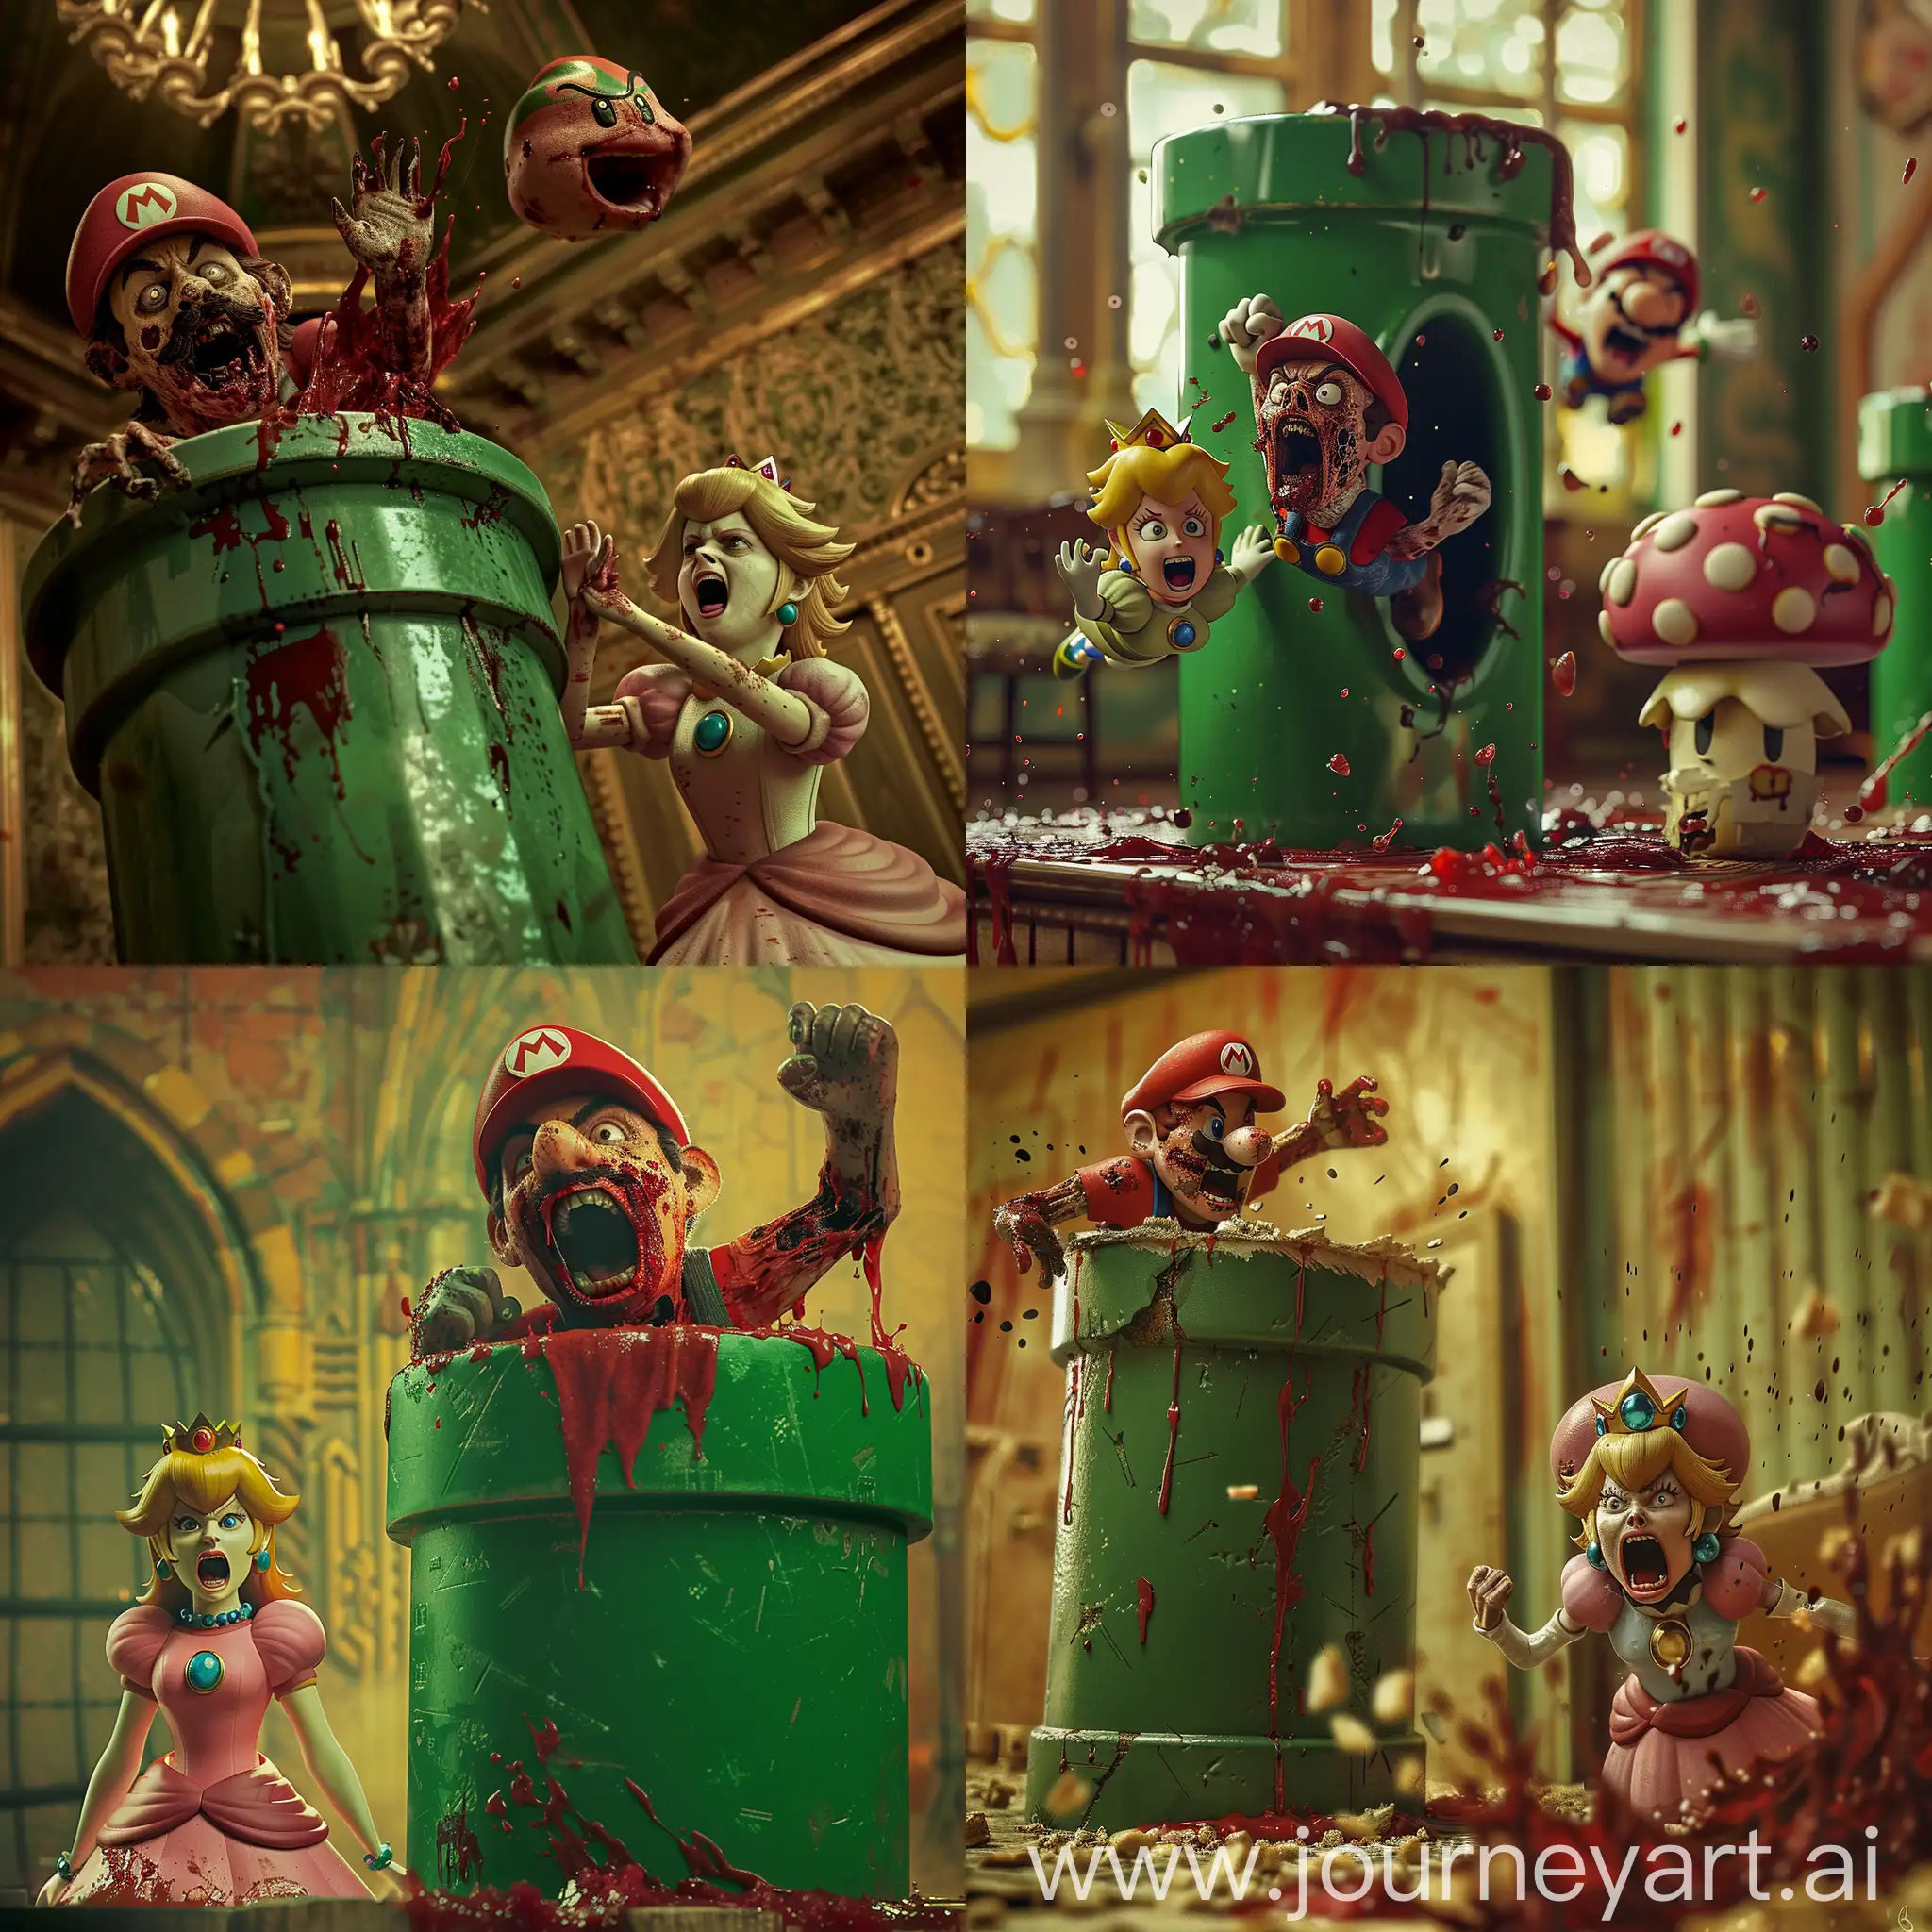 Zombie-Mario-Emerges-from-Castle-Cylinder-Princess-Peach-in-Distress